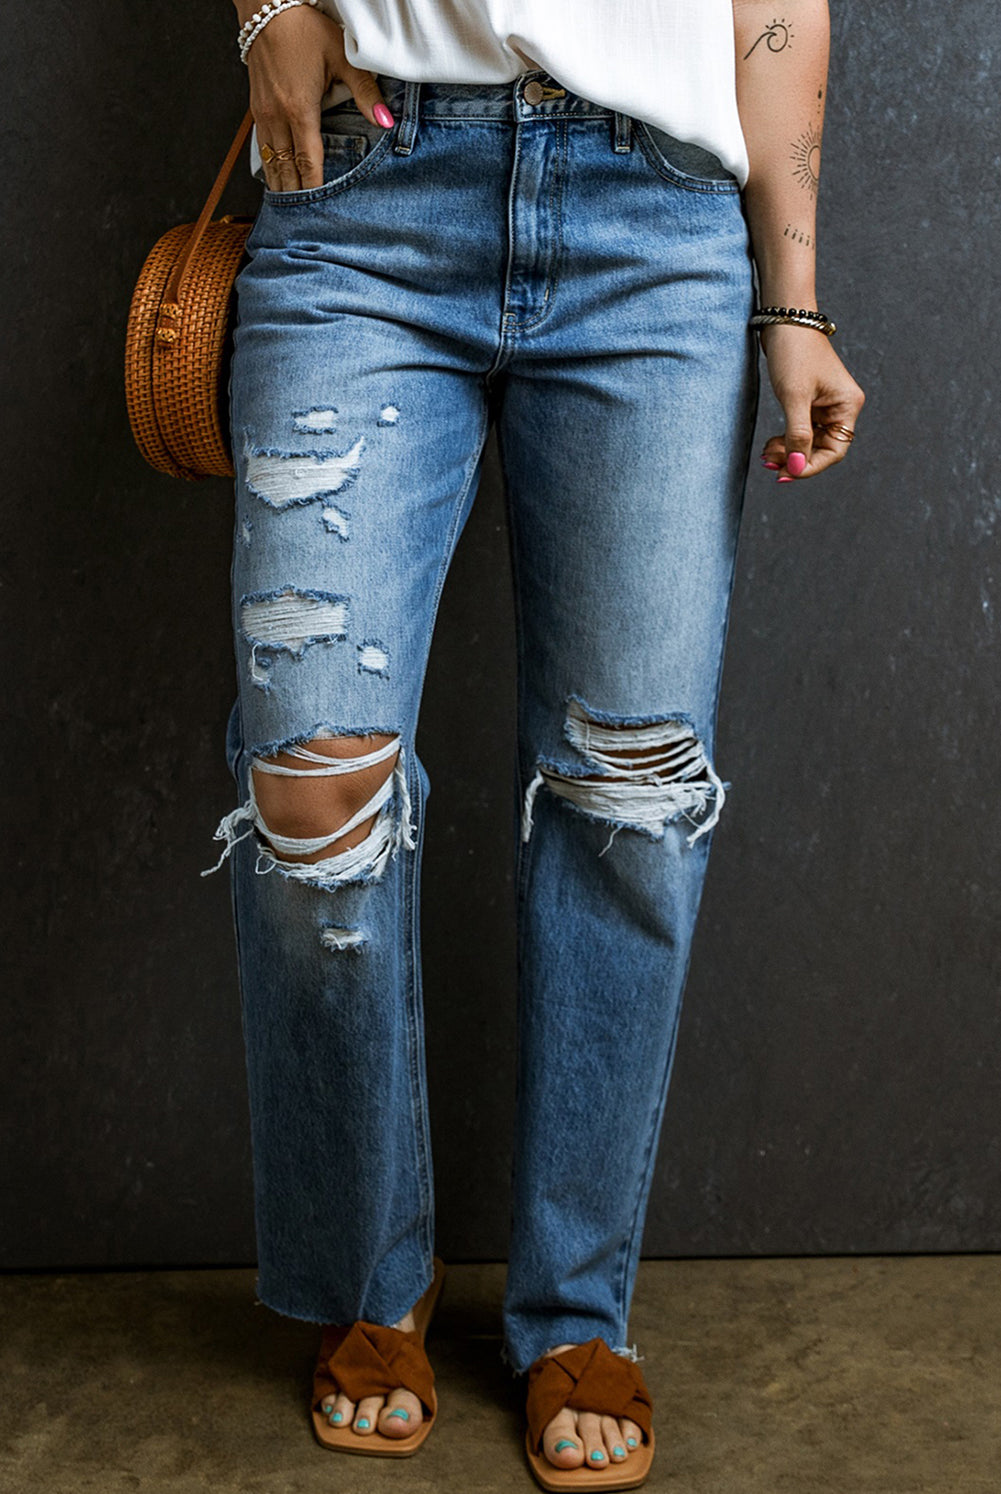 Close-up of distressed boyfriend jeans with strategic rips and a relaxed fit, paired with brown sandals and a woven bag.